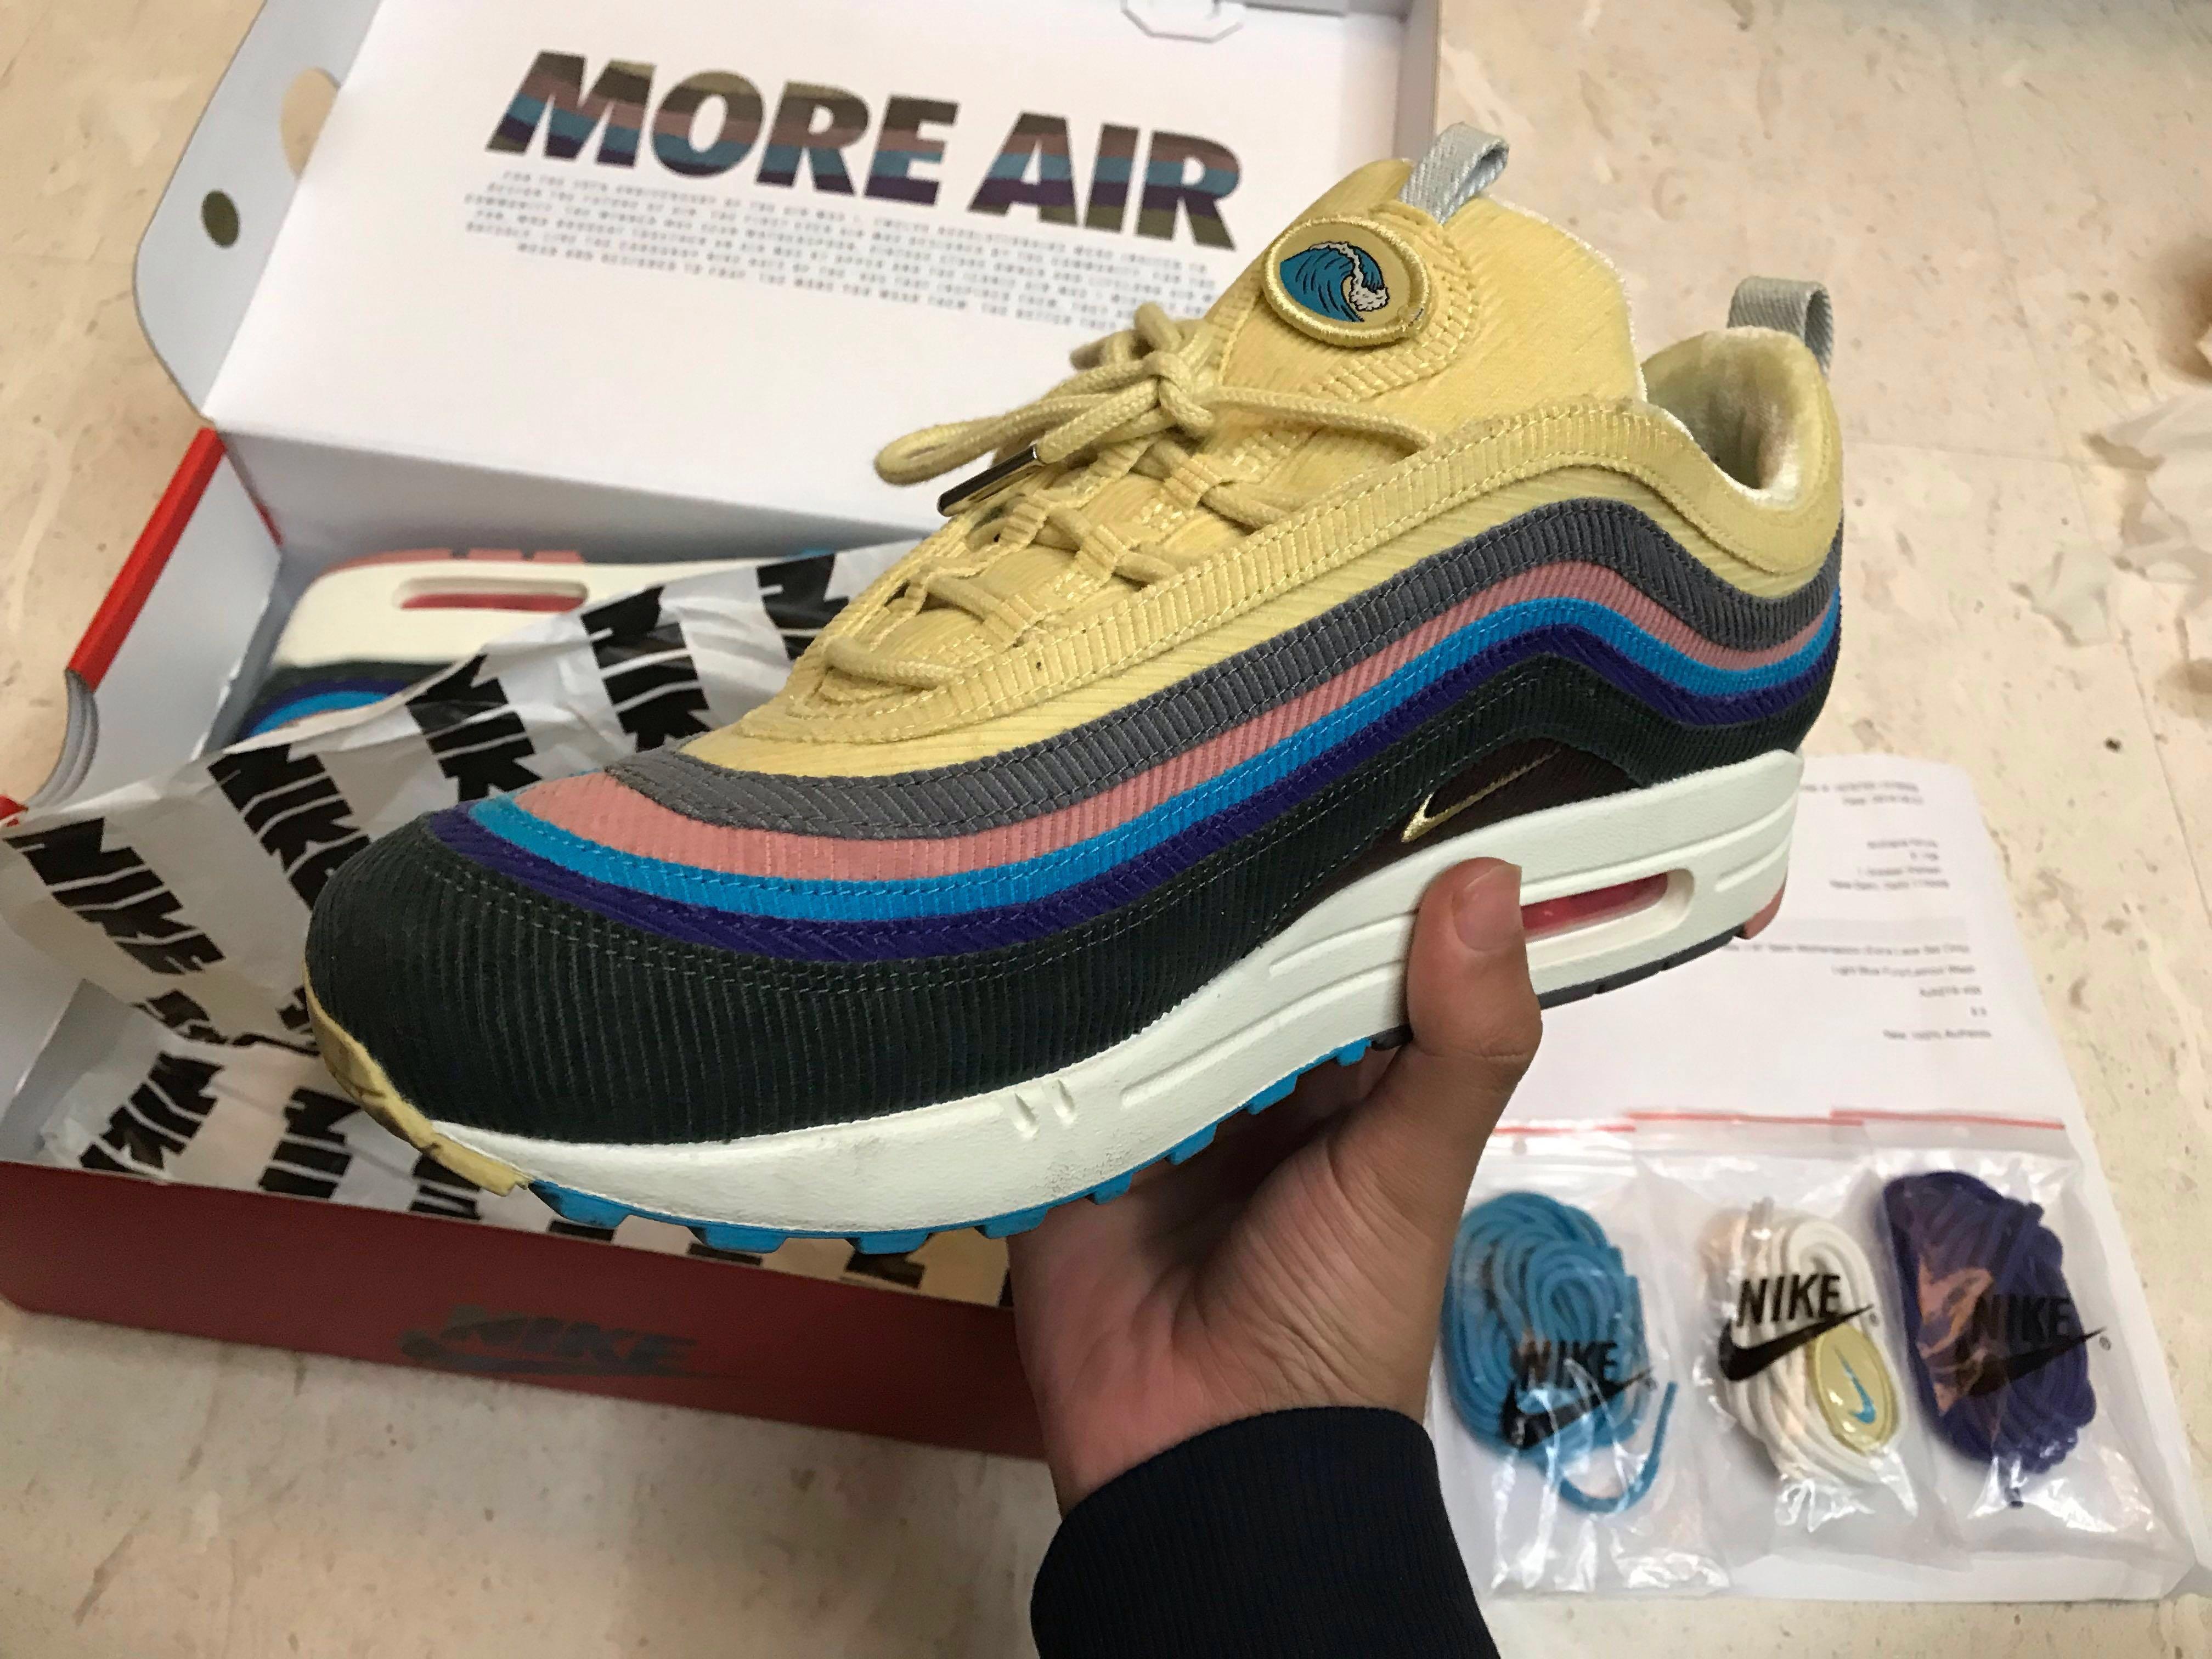 Air Max 97 Sean Wotherspoon, Men's 